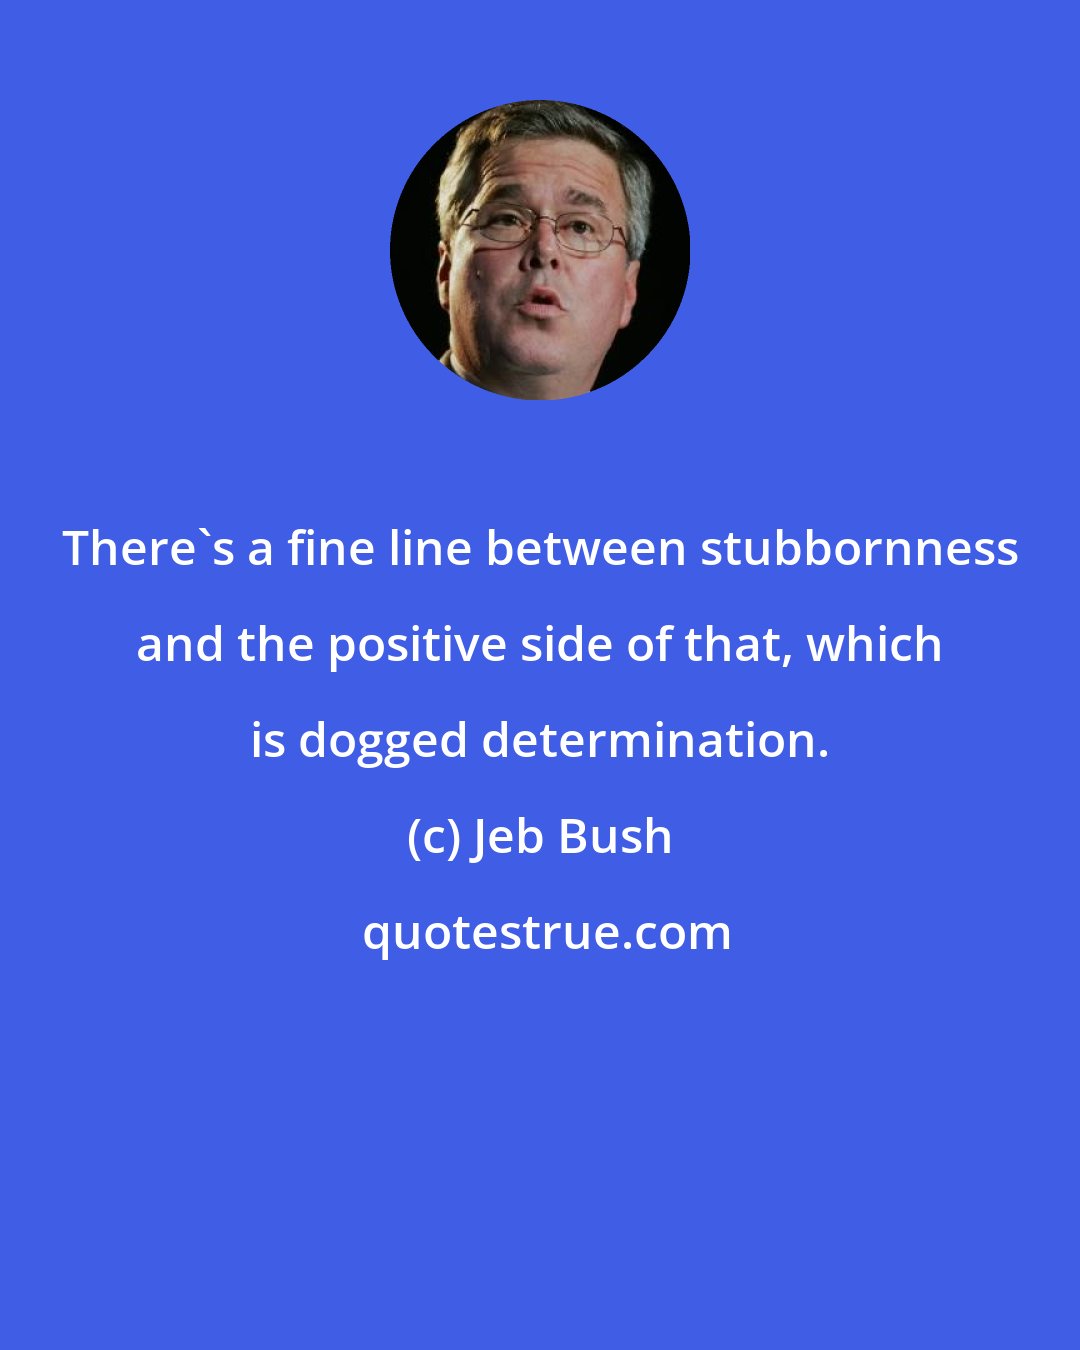 Jeb Bush: There's a fine line between stubbornness and the positive side of that, which is dogged determination.